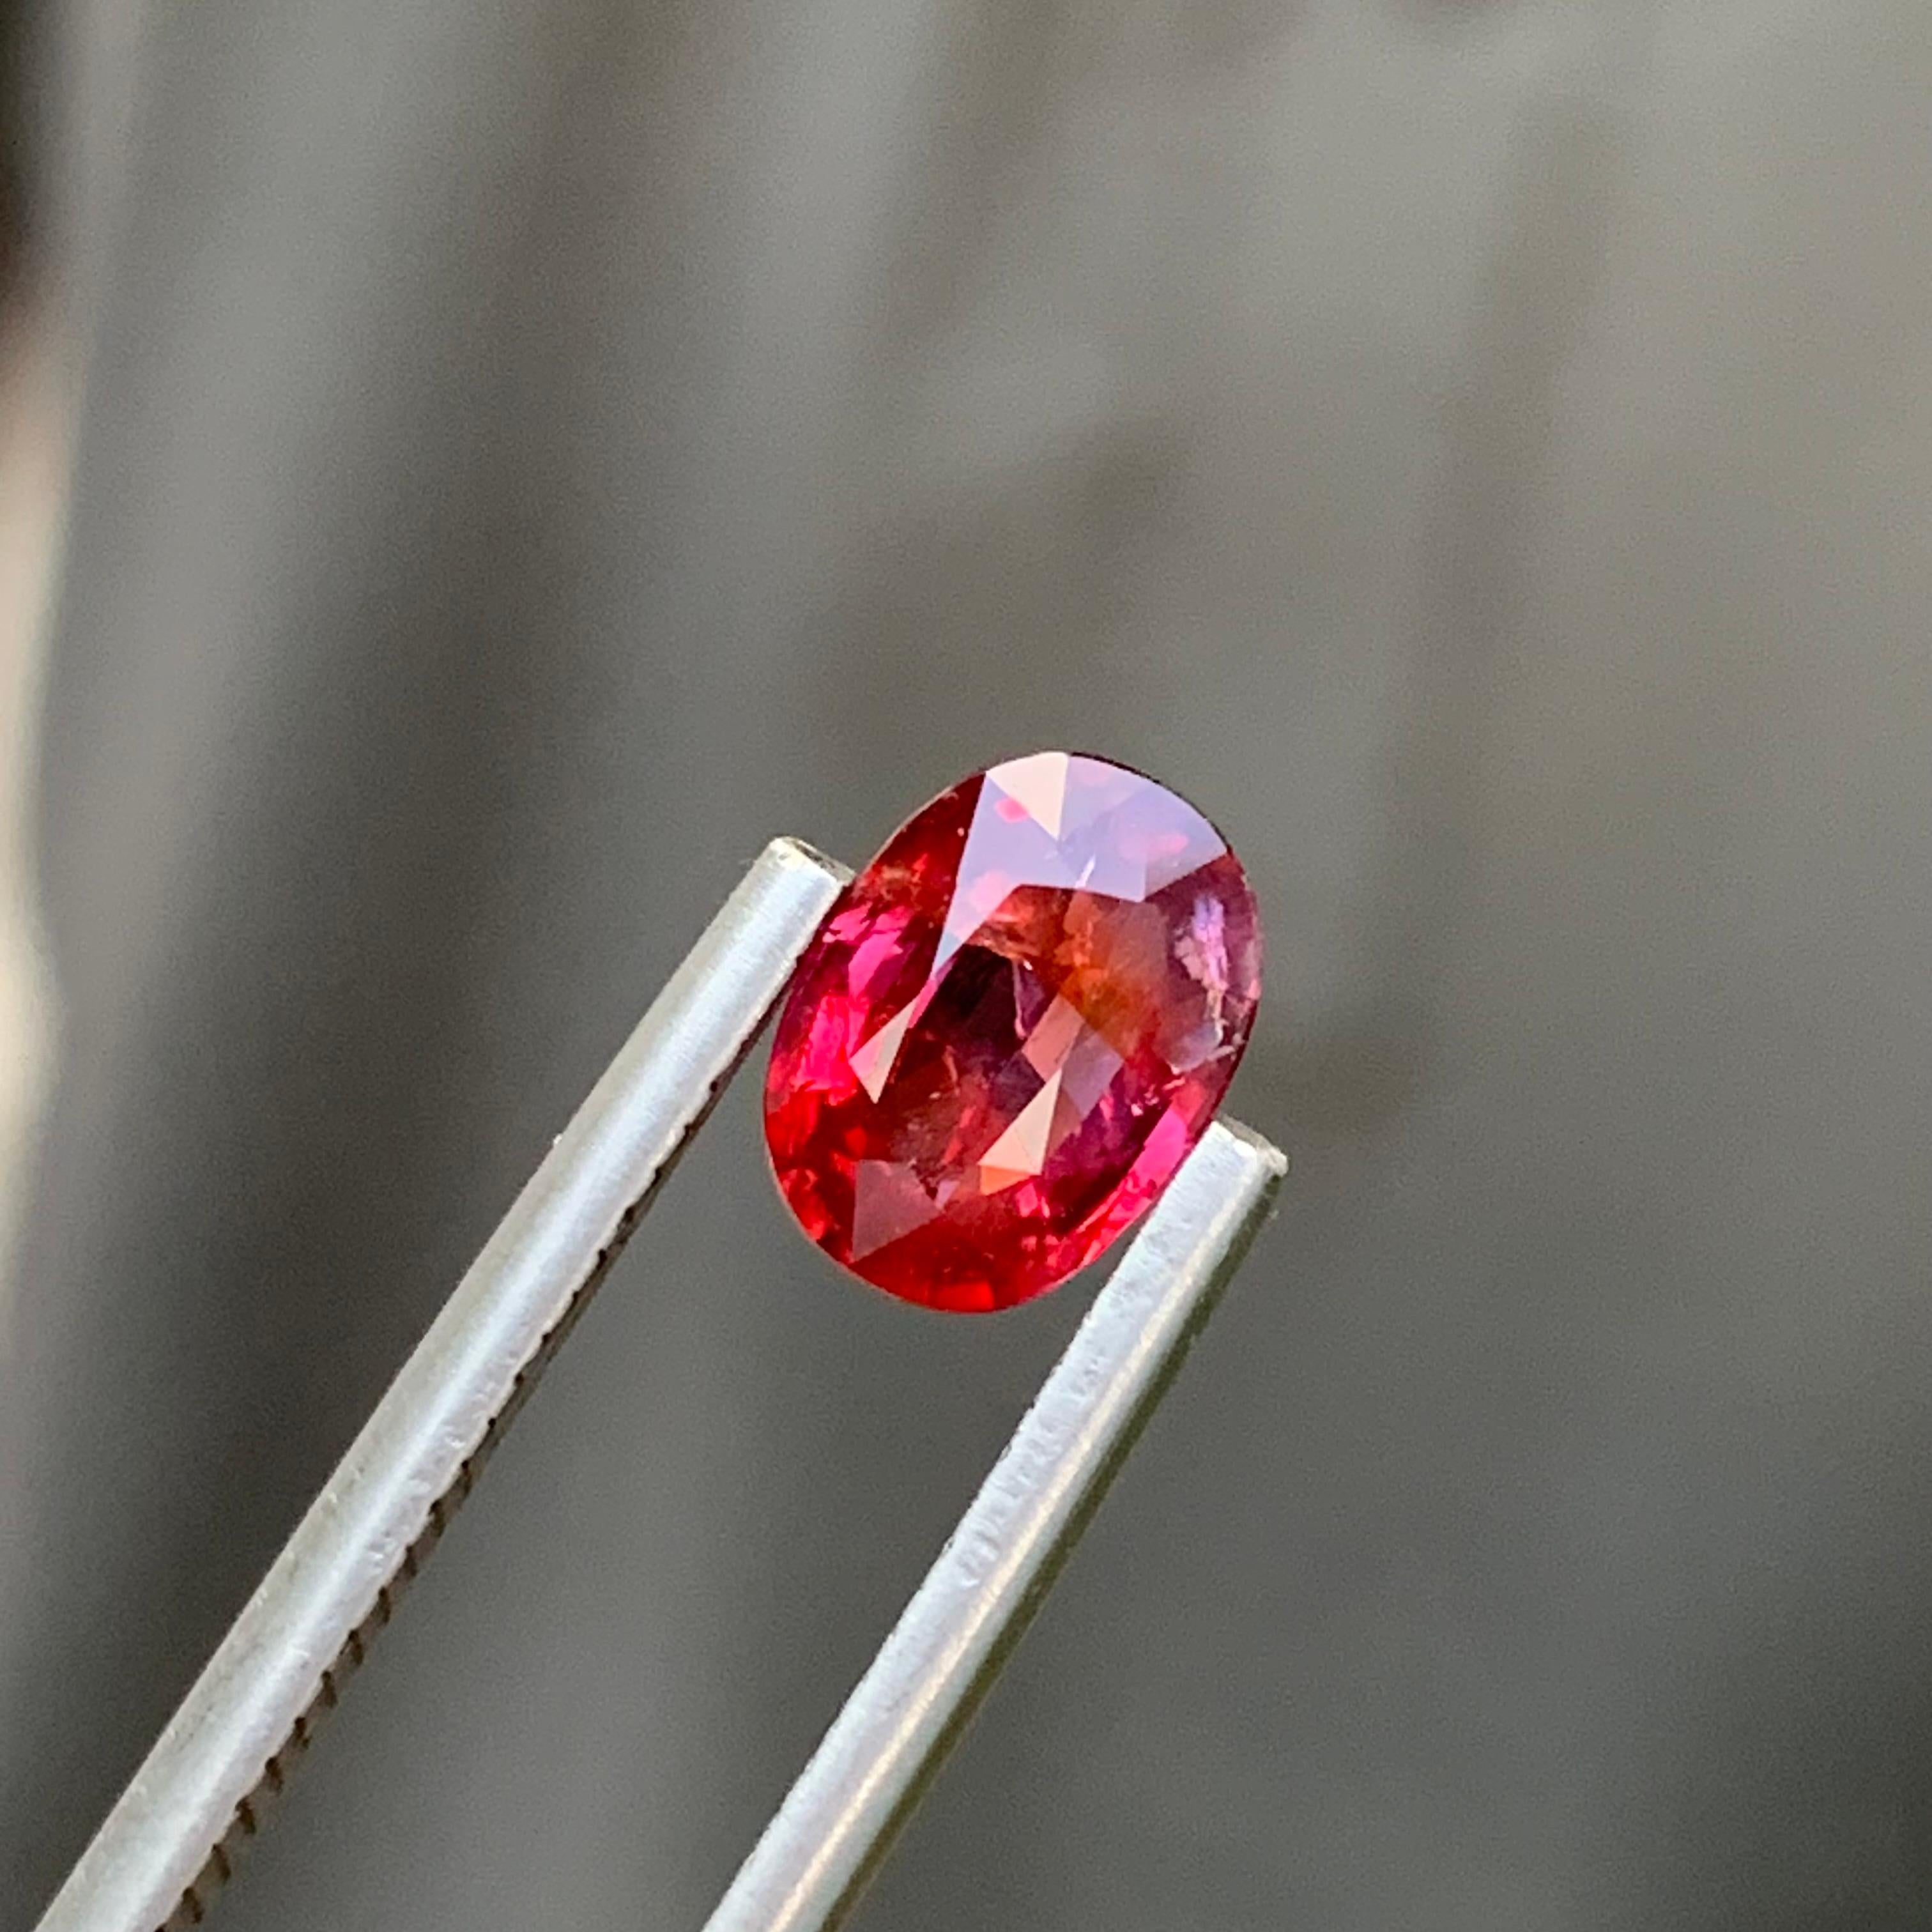 Certified Natural Loose 1.79 Carat Lustrous Ruby Oval Shape Gem From Africa  For Sale 6